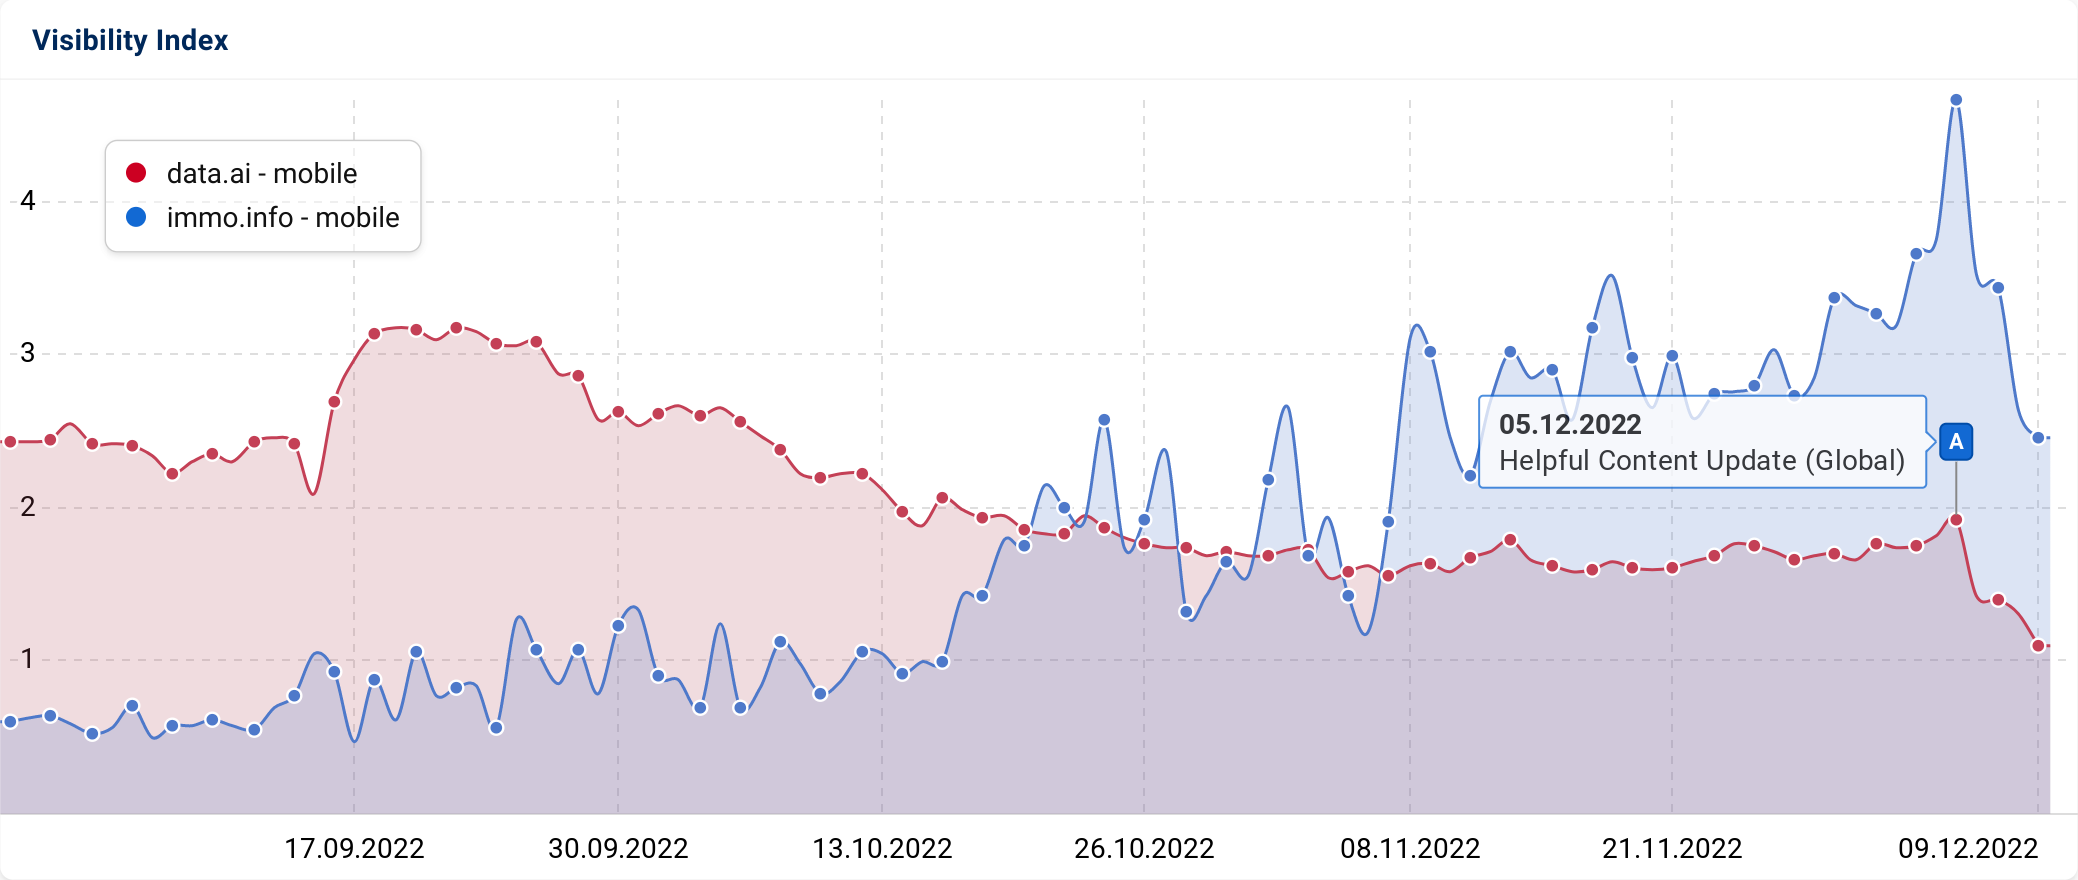 Visibility Index graph for two domains that were potentially affected by the December Helpful Content Update.